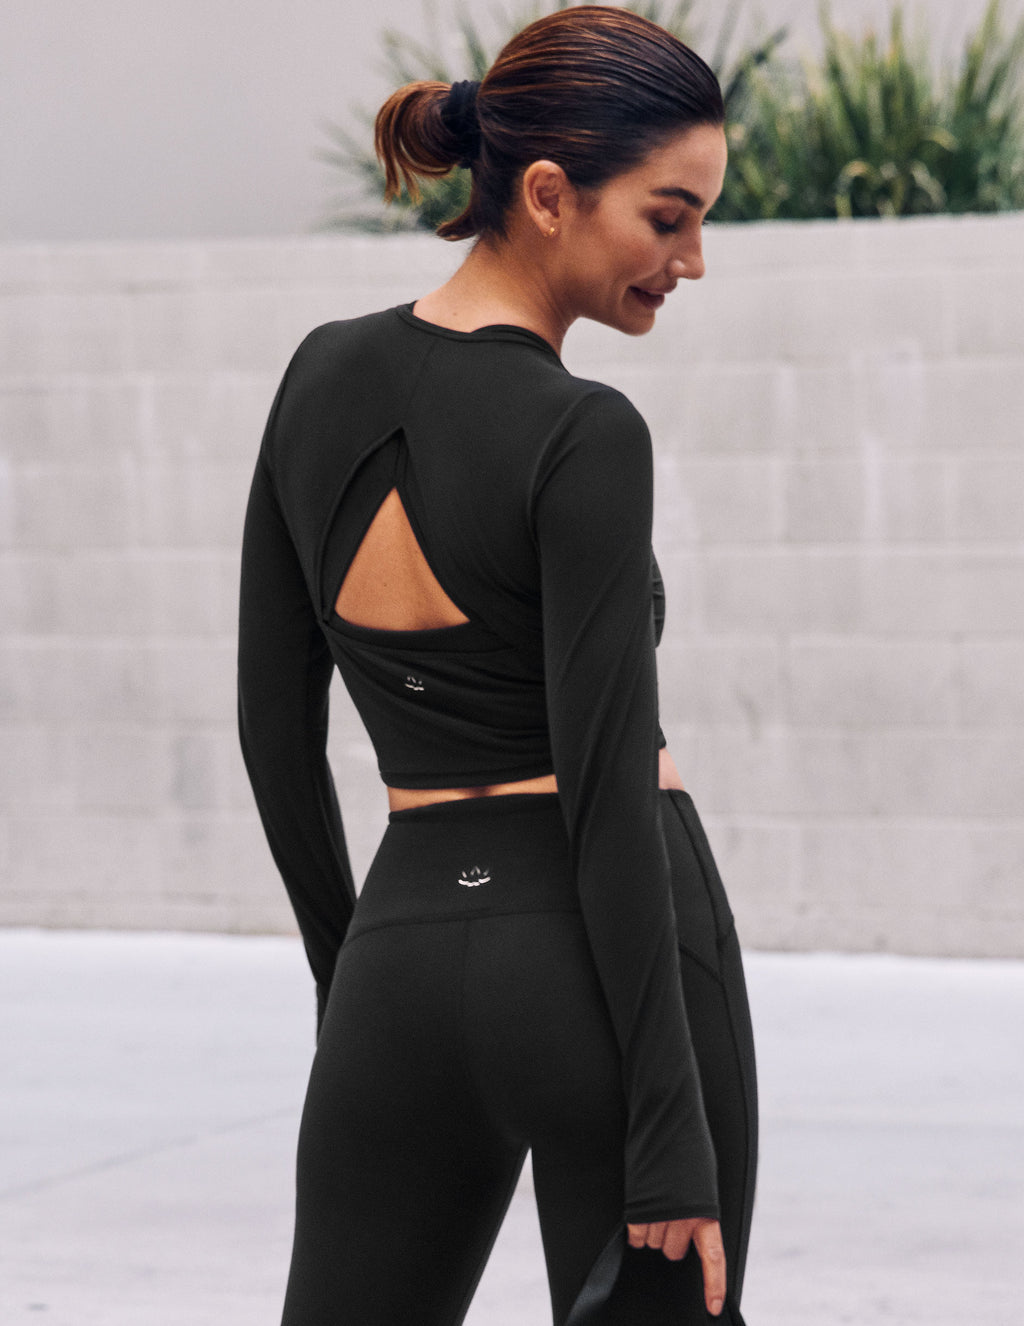 L 018 Women Yoga Long Sleeve T Shirts Side Waist Elastic Folds Sports Tops  Ribbed Shirt Stretchy Slim Skin Friendly Fitness Tee For On The Move From  Wslly104104, $14.8